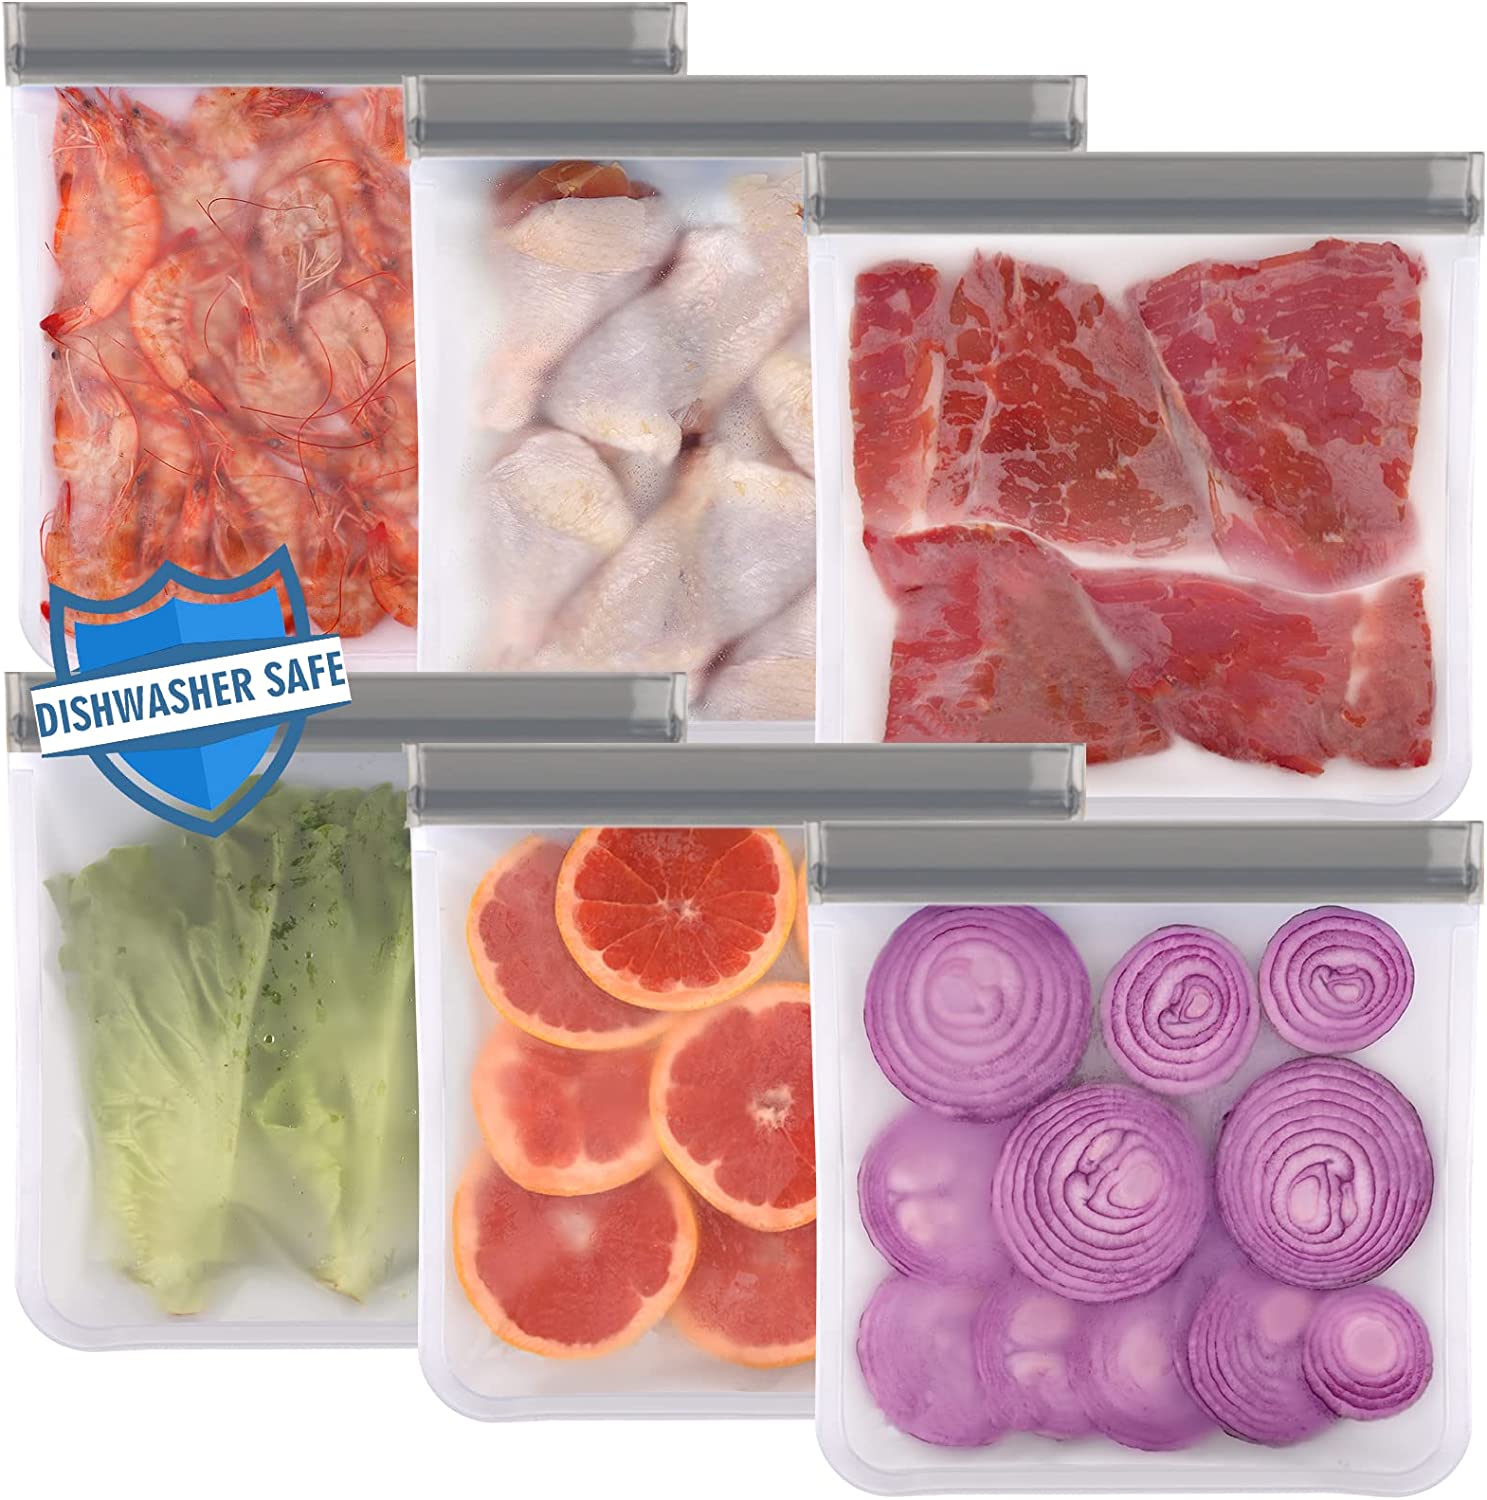 12pcs Reusable Stand-up Food Storage Bags, Fda-grade Reusable Sandwich Bags,  3pcs Reusable Gallon Bags+4pcs Reusable Freezer Bags+5pcs Reusable Bags For  Meat, Fruit, Cereal, Snacks